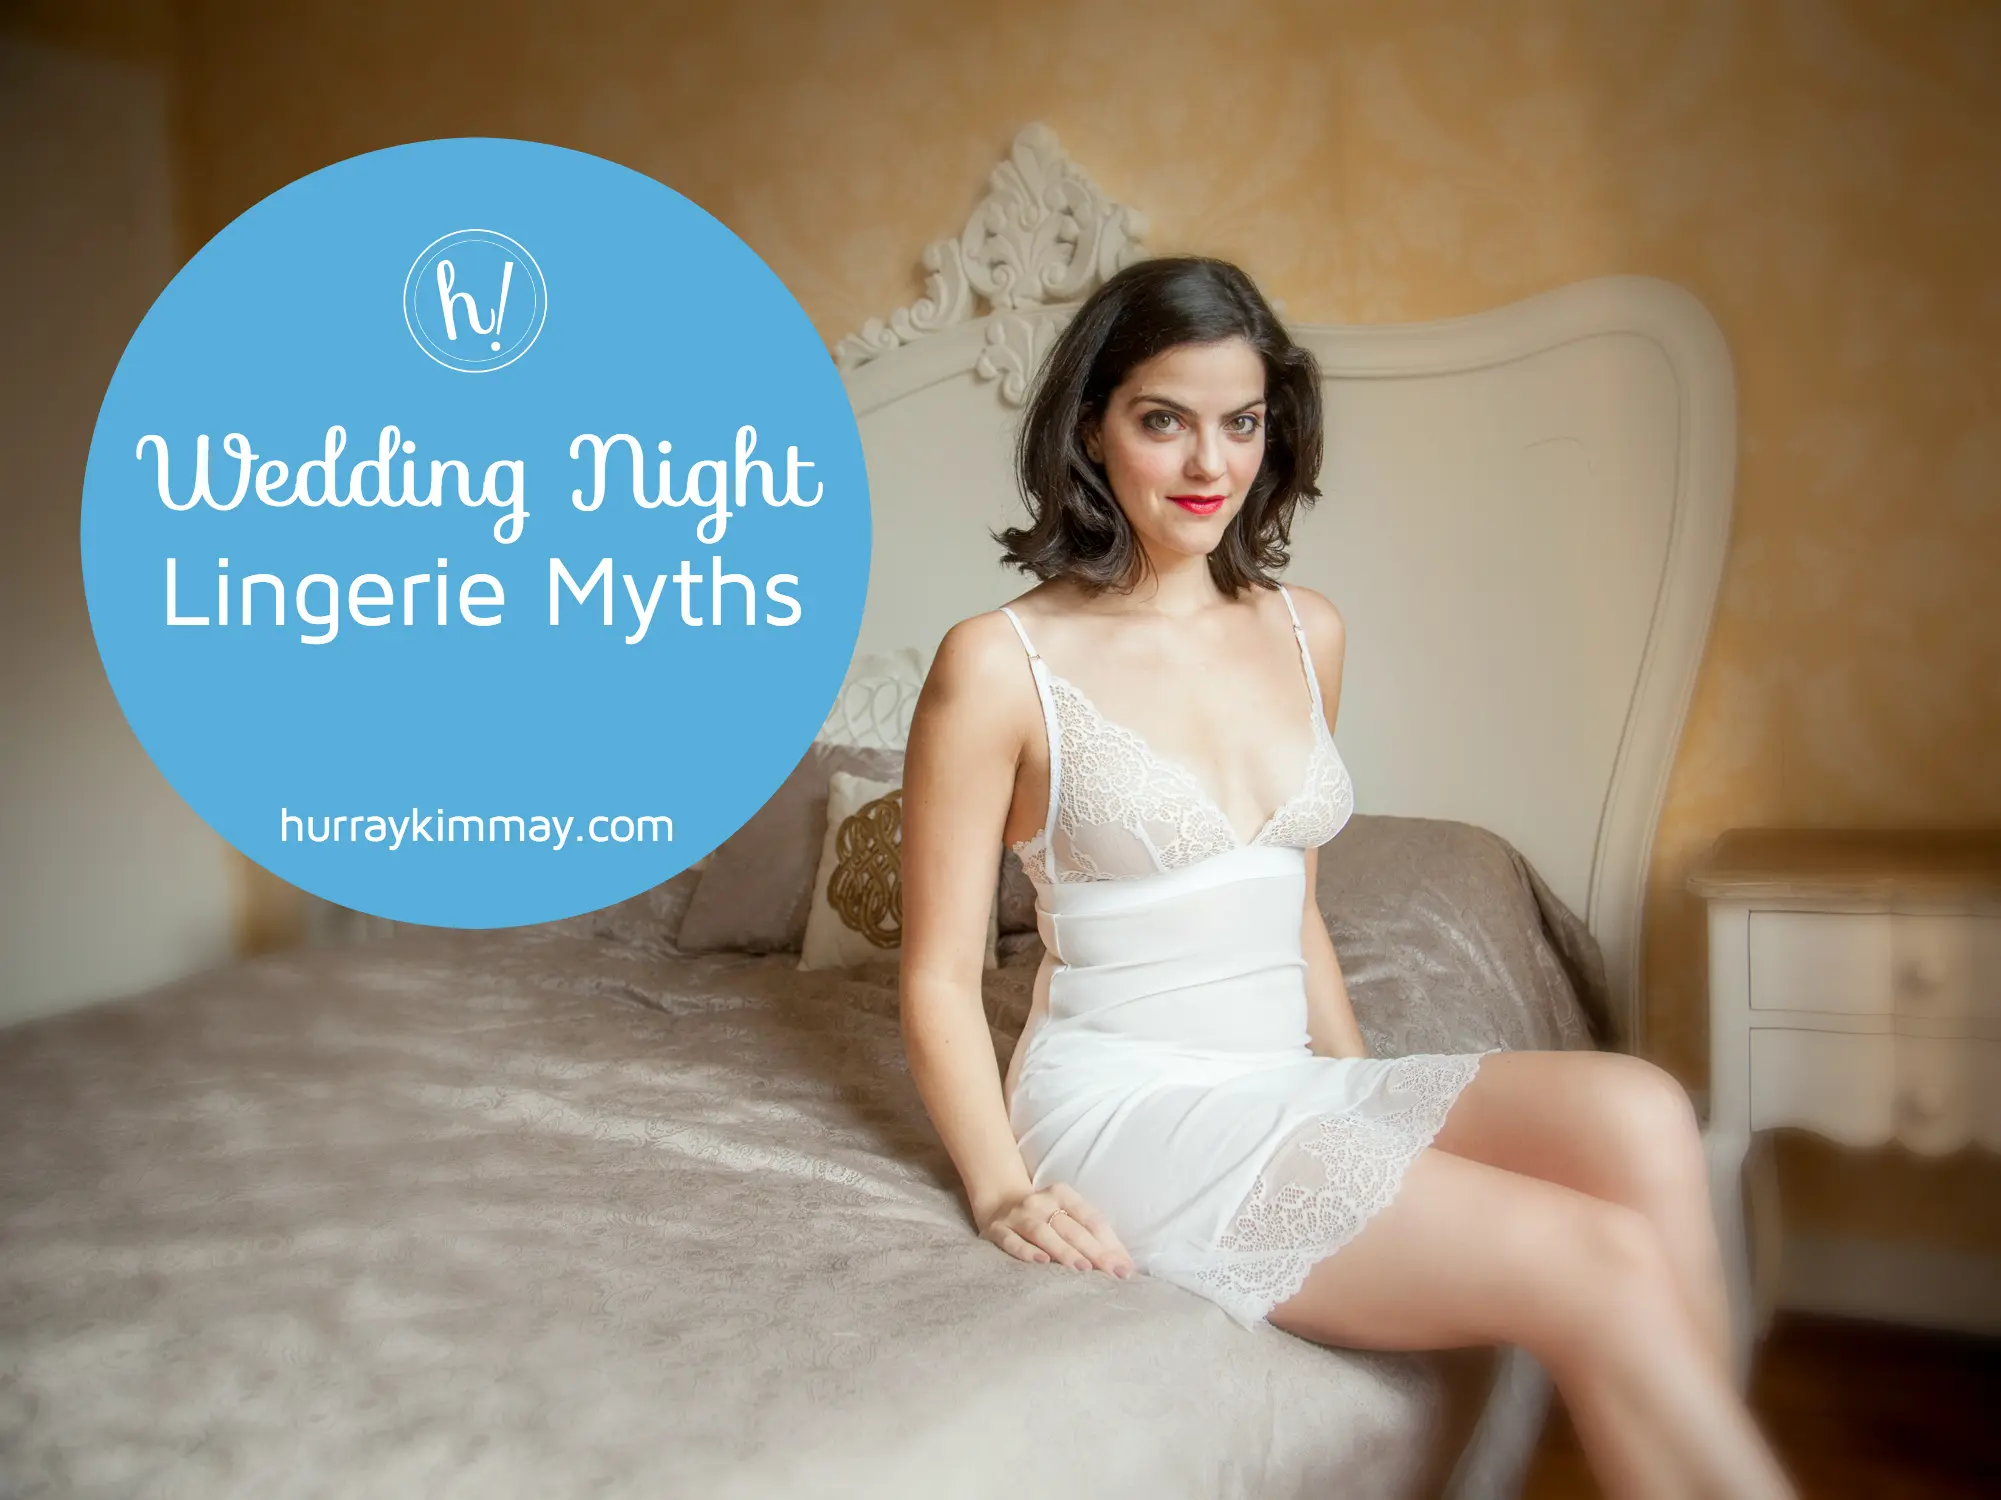 Bridal lingerie Q&A and expert recommendations